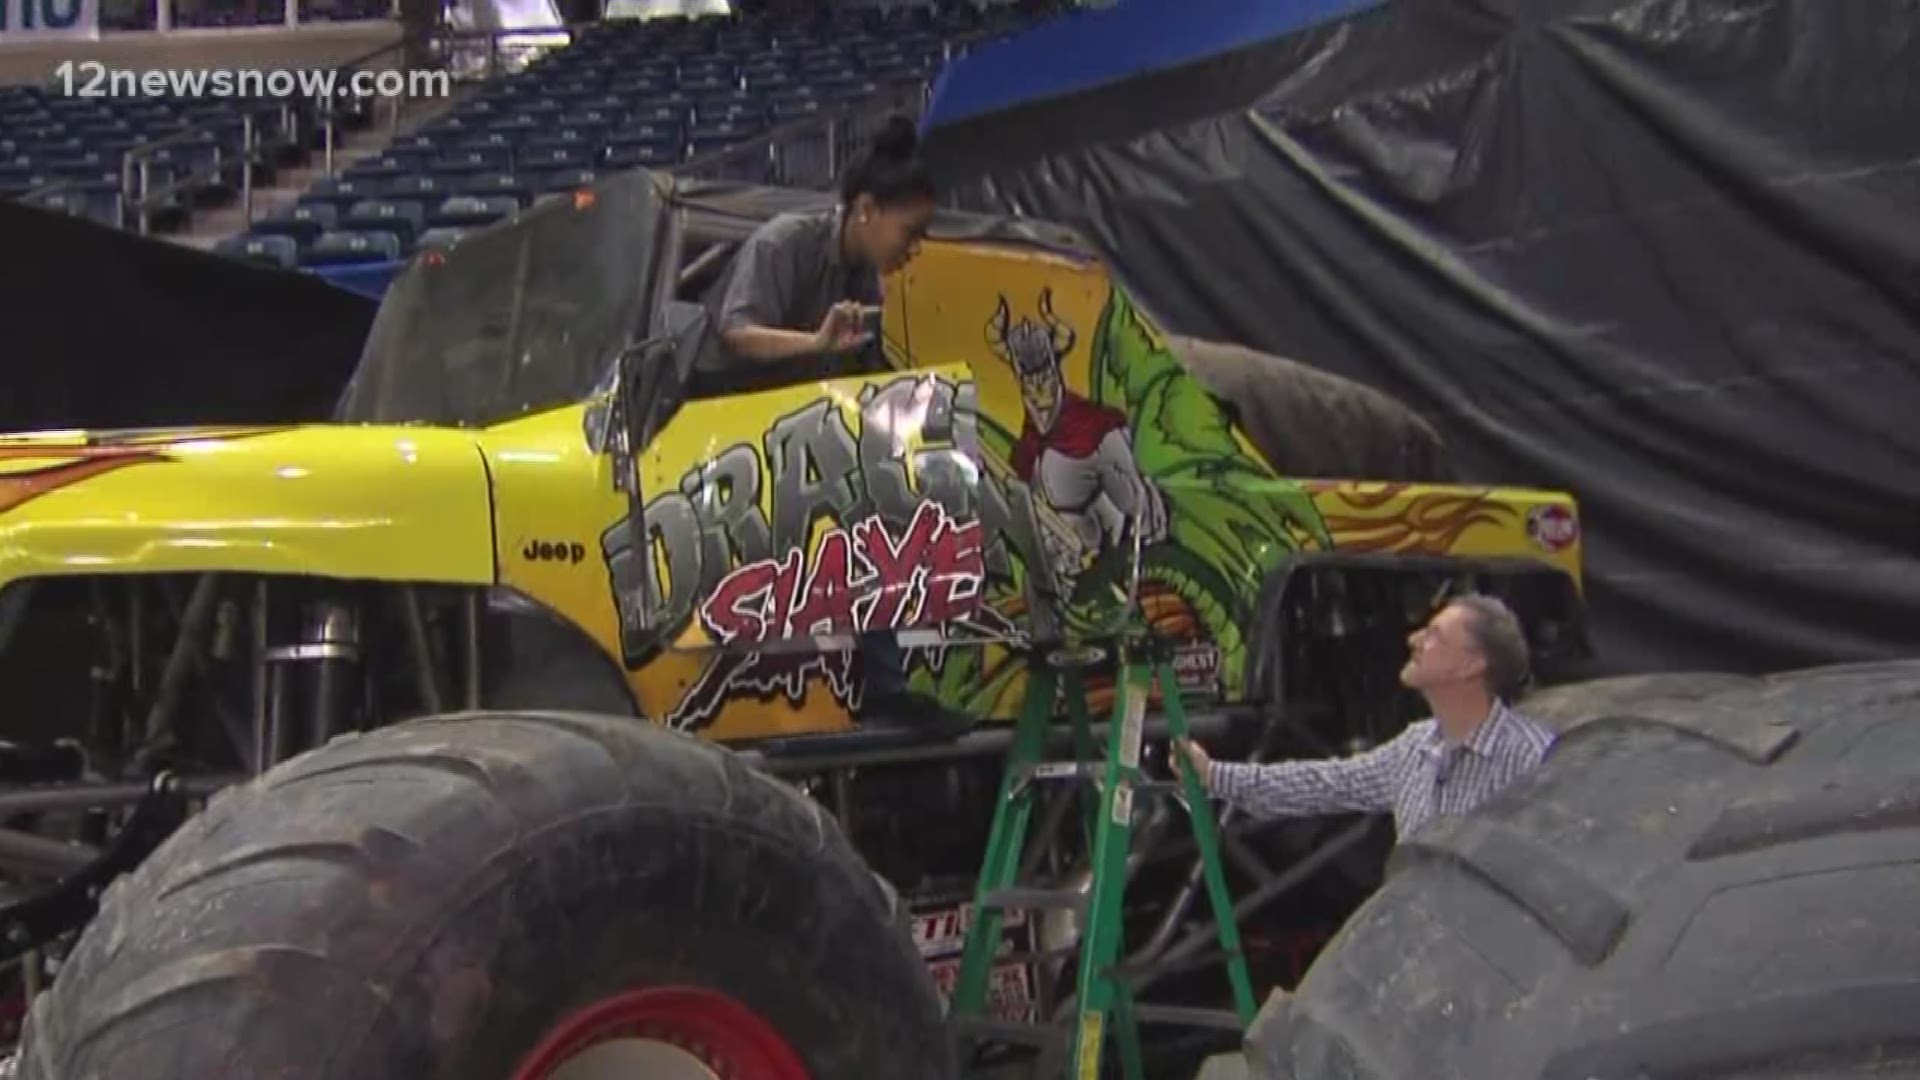 Monster Nation promises to bring a lot more than just monster trucks to Beaumont. Be ready for a fun time today and tomorrow with Monster Nation in Ford Arena